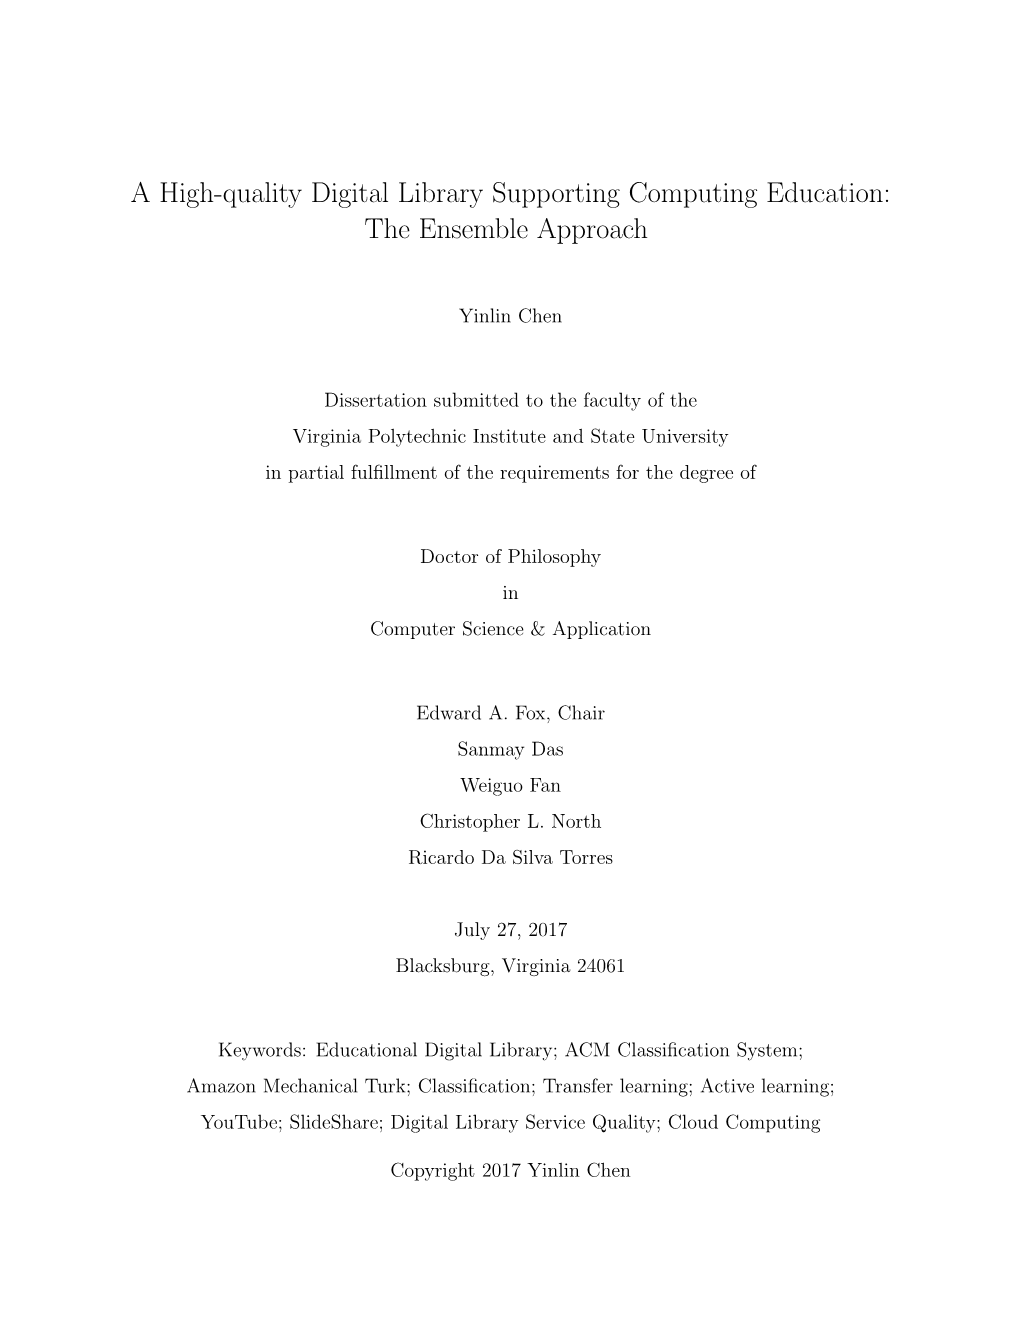 A High-Quality Digital Library Supporting Computing Education: the Ensemble Approach